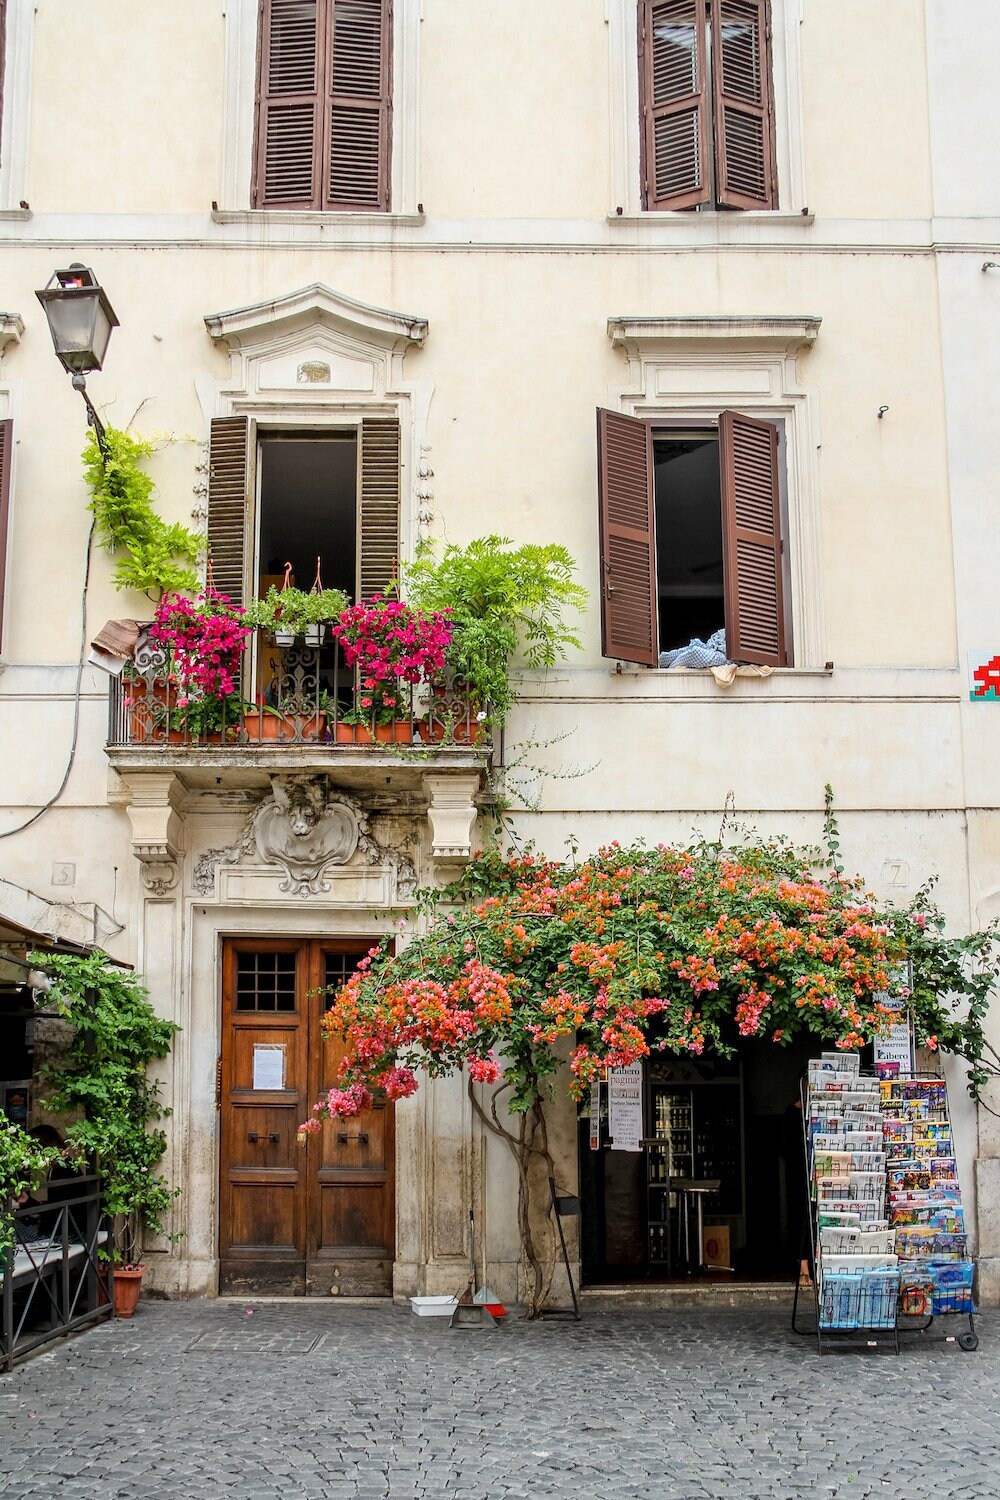 Rome Italy Door Falling off Bicycles Bougainvillea Flower - Etsy